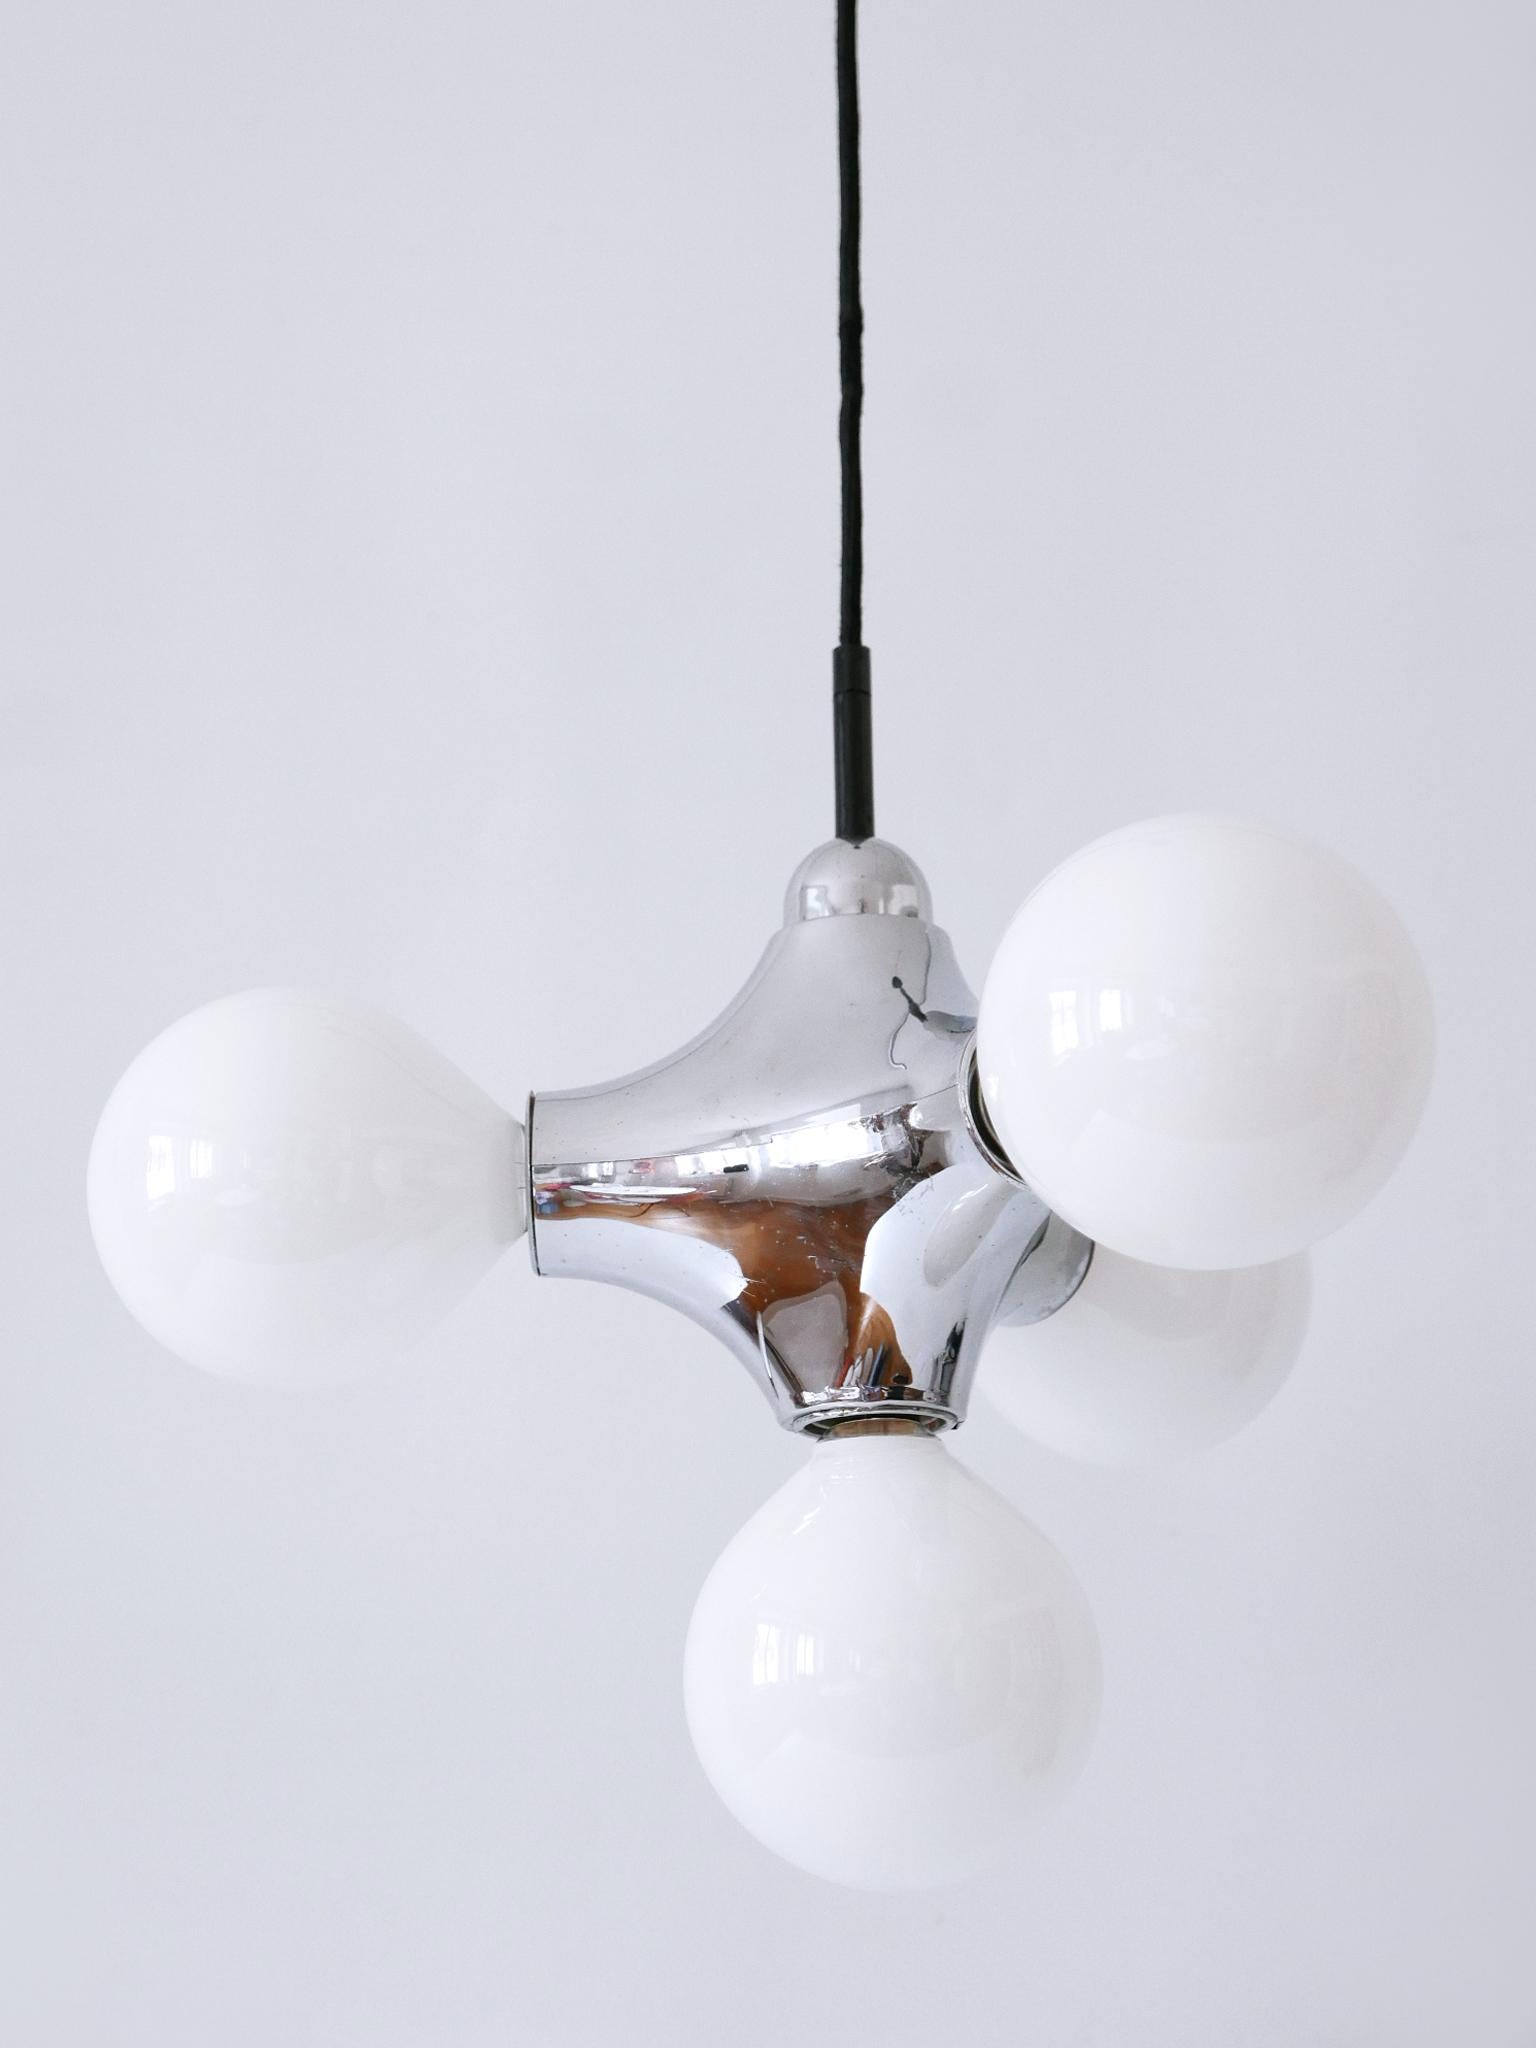 Rare Mid-Century Modern Atomic Pendant Lamp by Gebrüder Cosack Germany 1970s For Sale 1